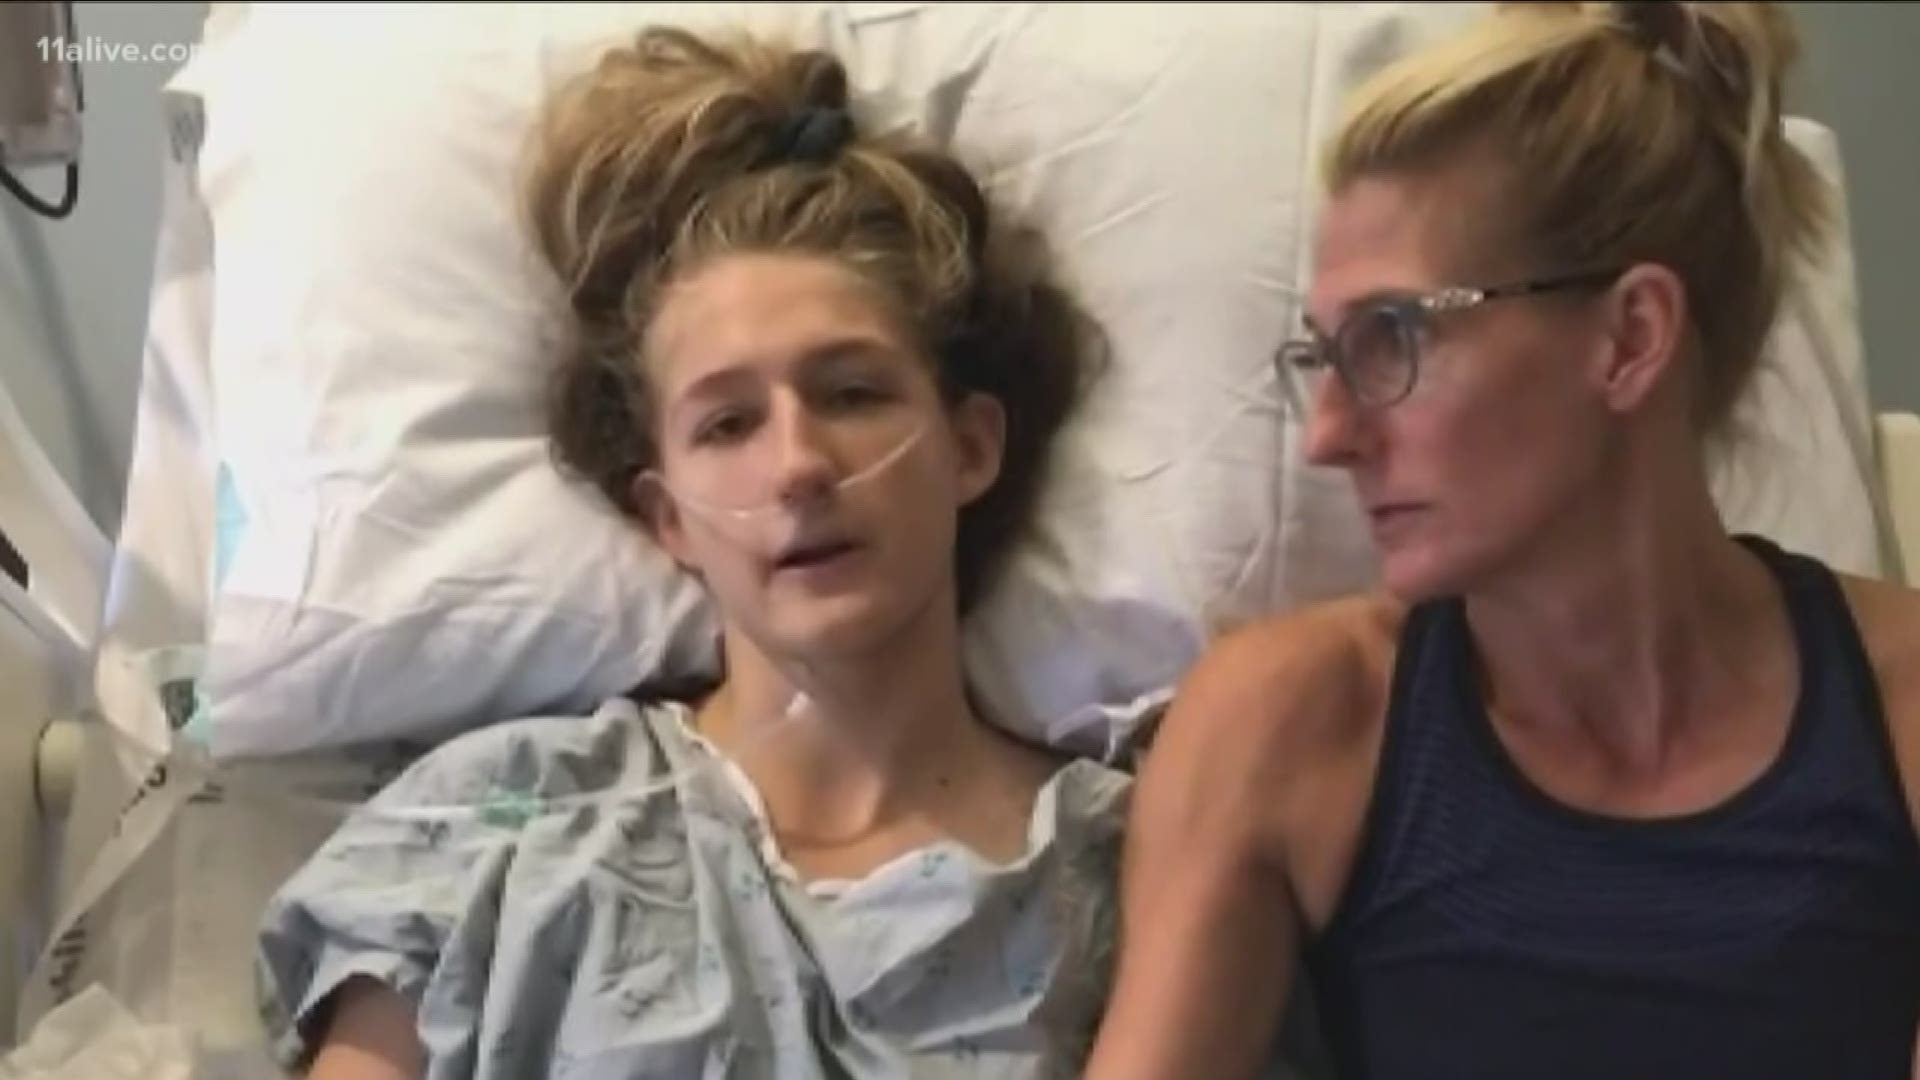 Zoe Ordway's car was smashed as she tried to make a left turn, leaving her hospitalized. She, her parents and neighbors want her accident to be the last one there.